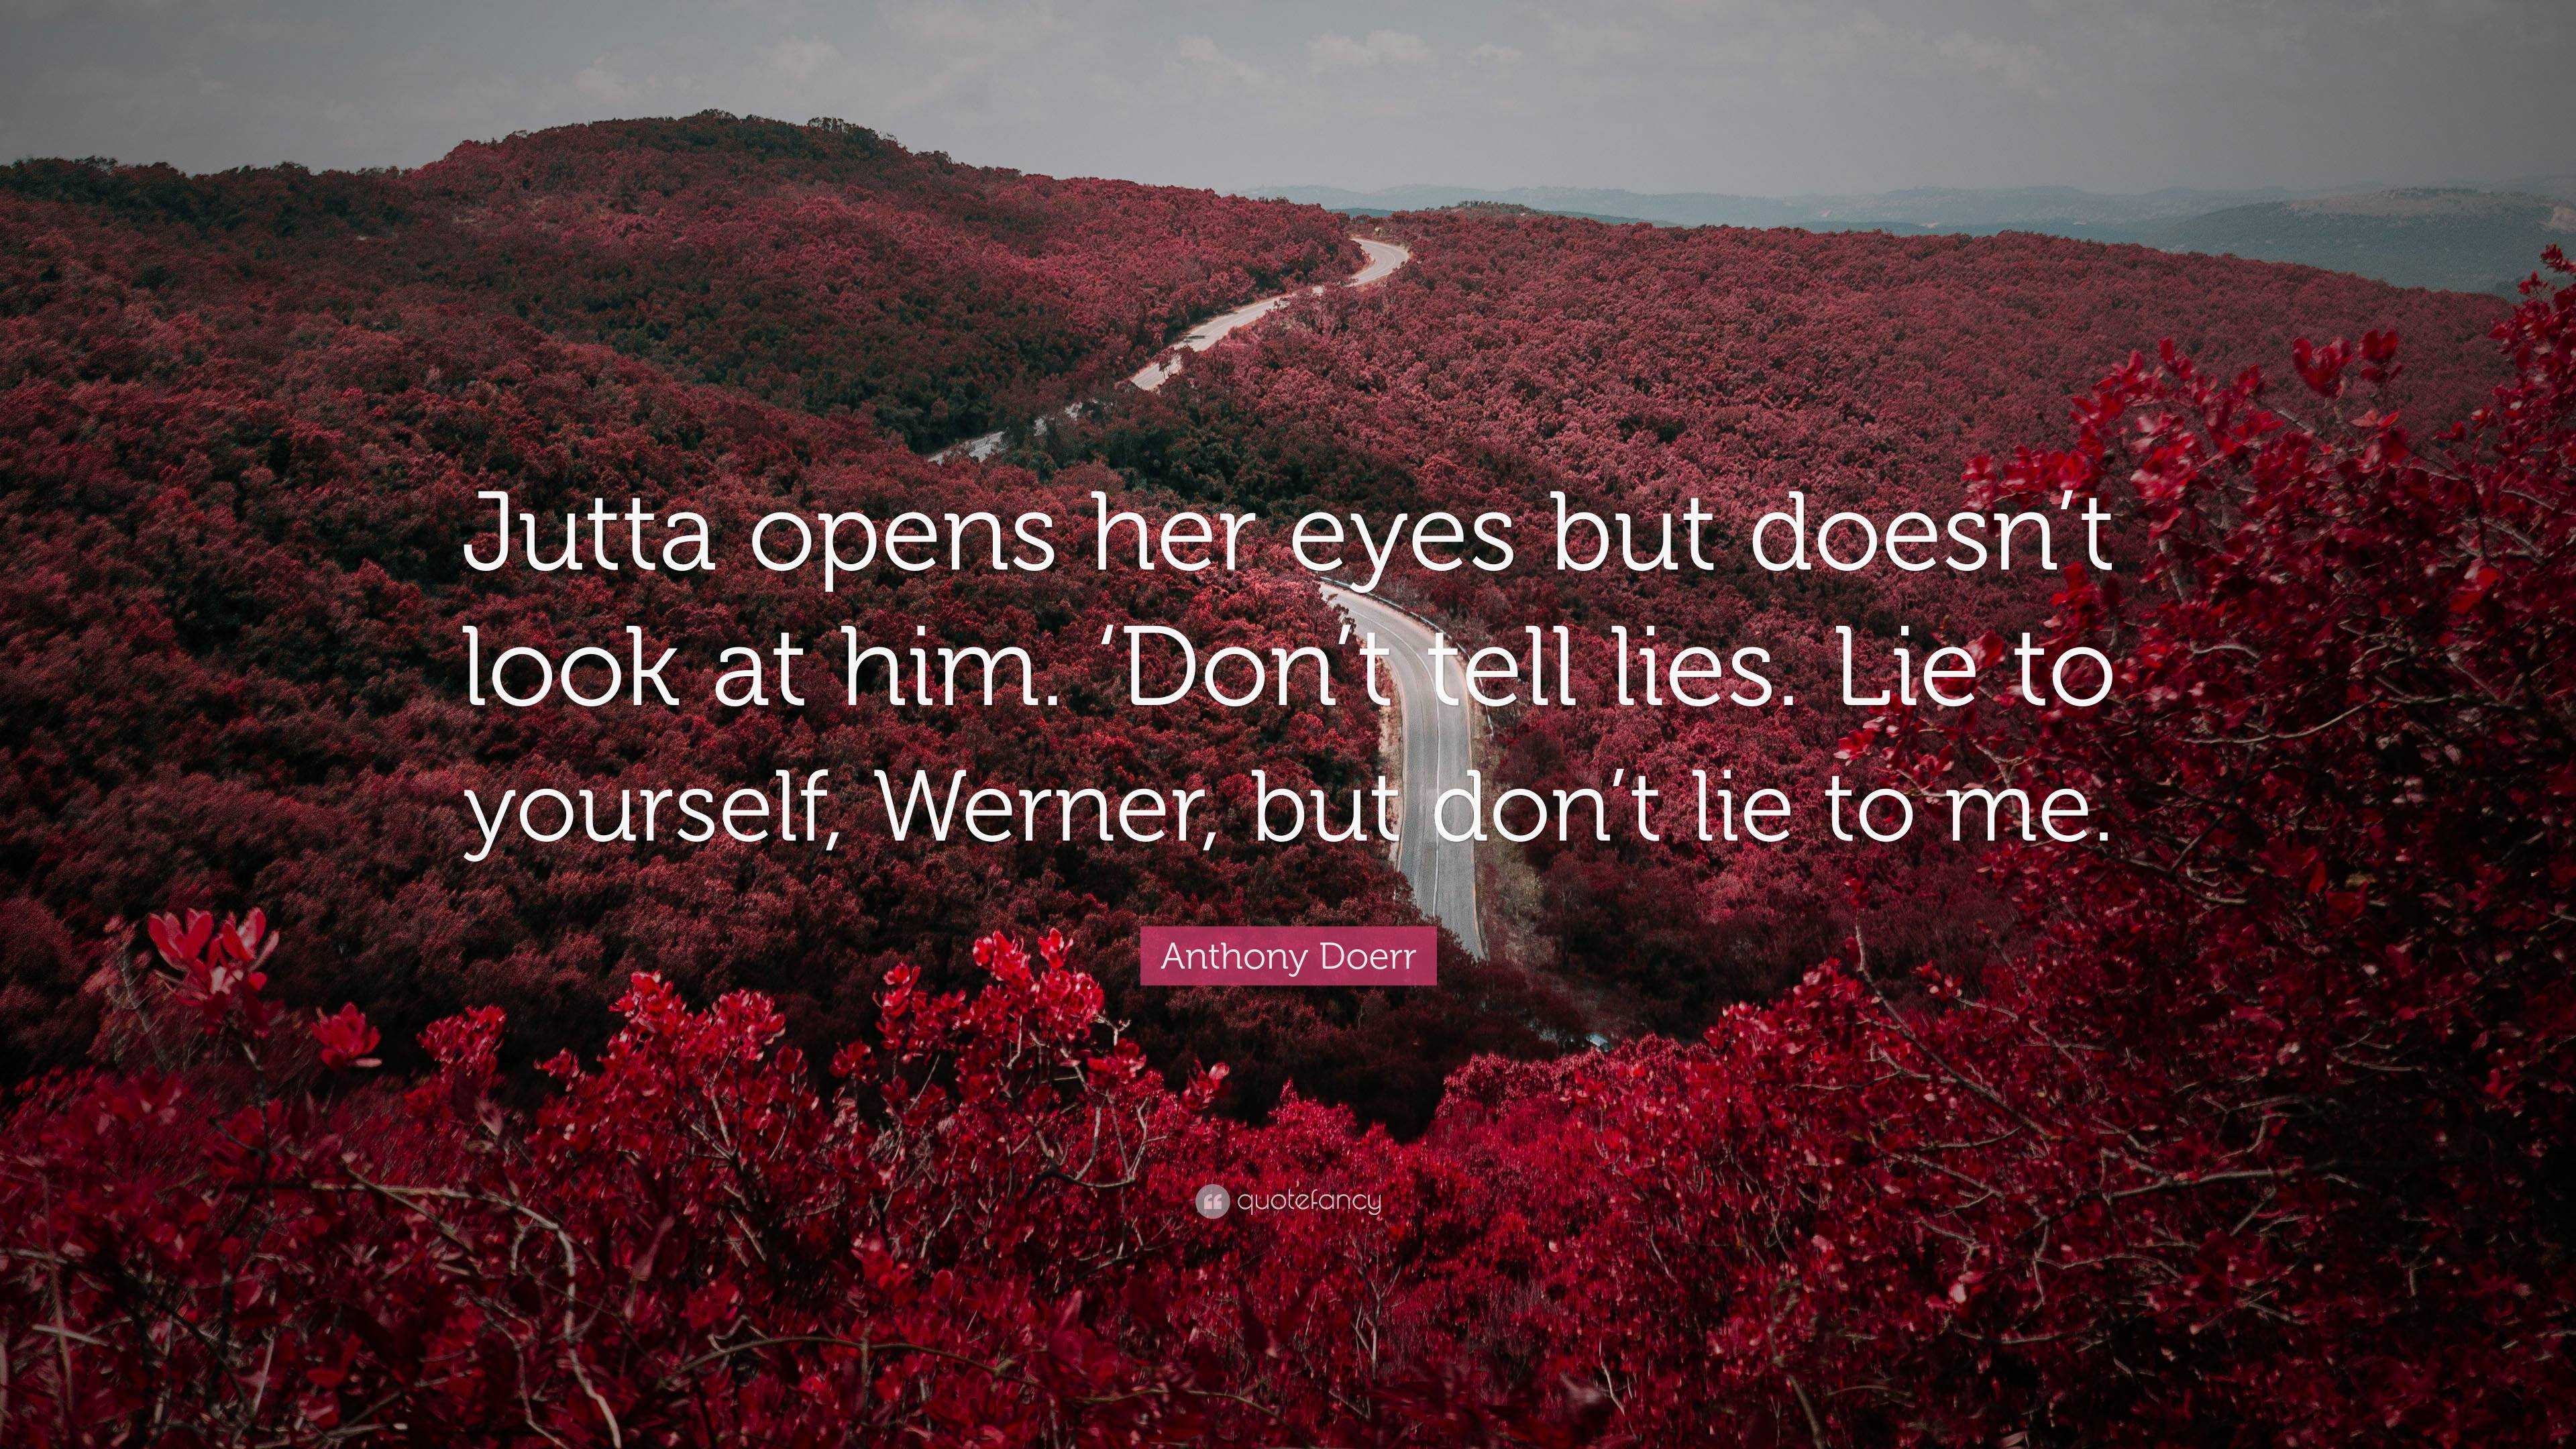 Anthony Doerr Quote “jutta Opens Her Eyes But Doesnt Look At Him ‘dont Tell Lies Lie To 6153